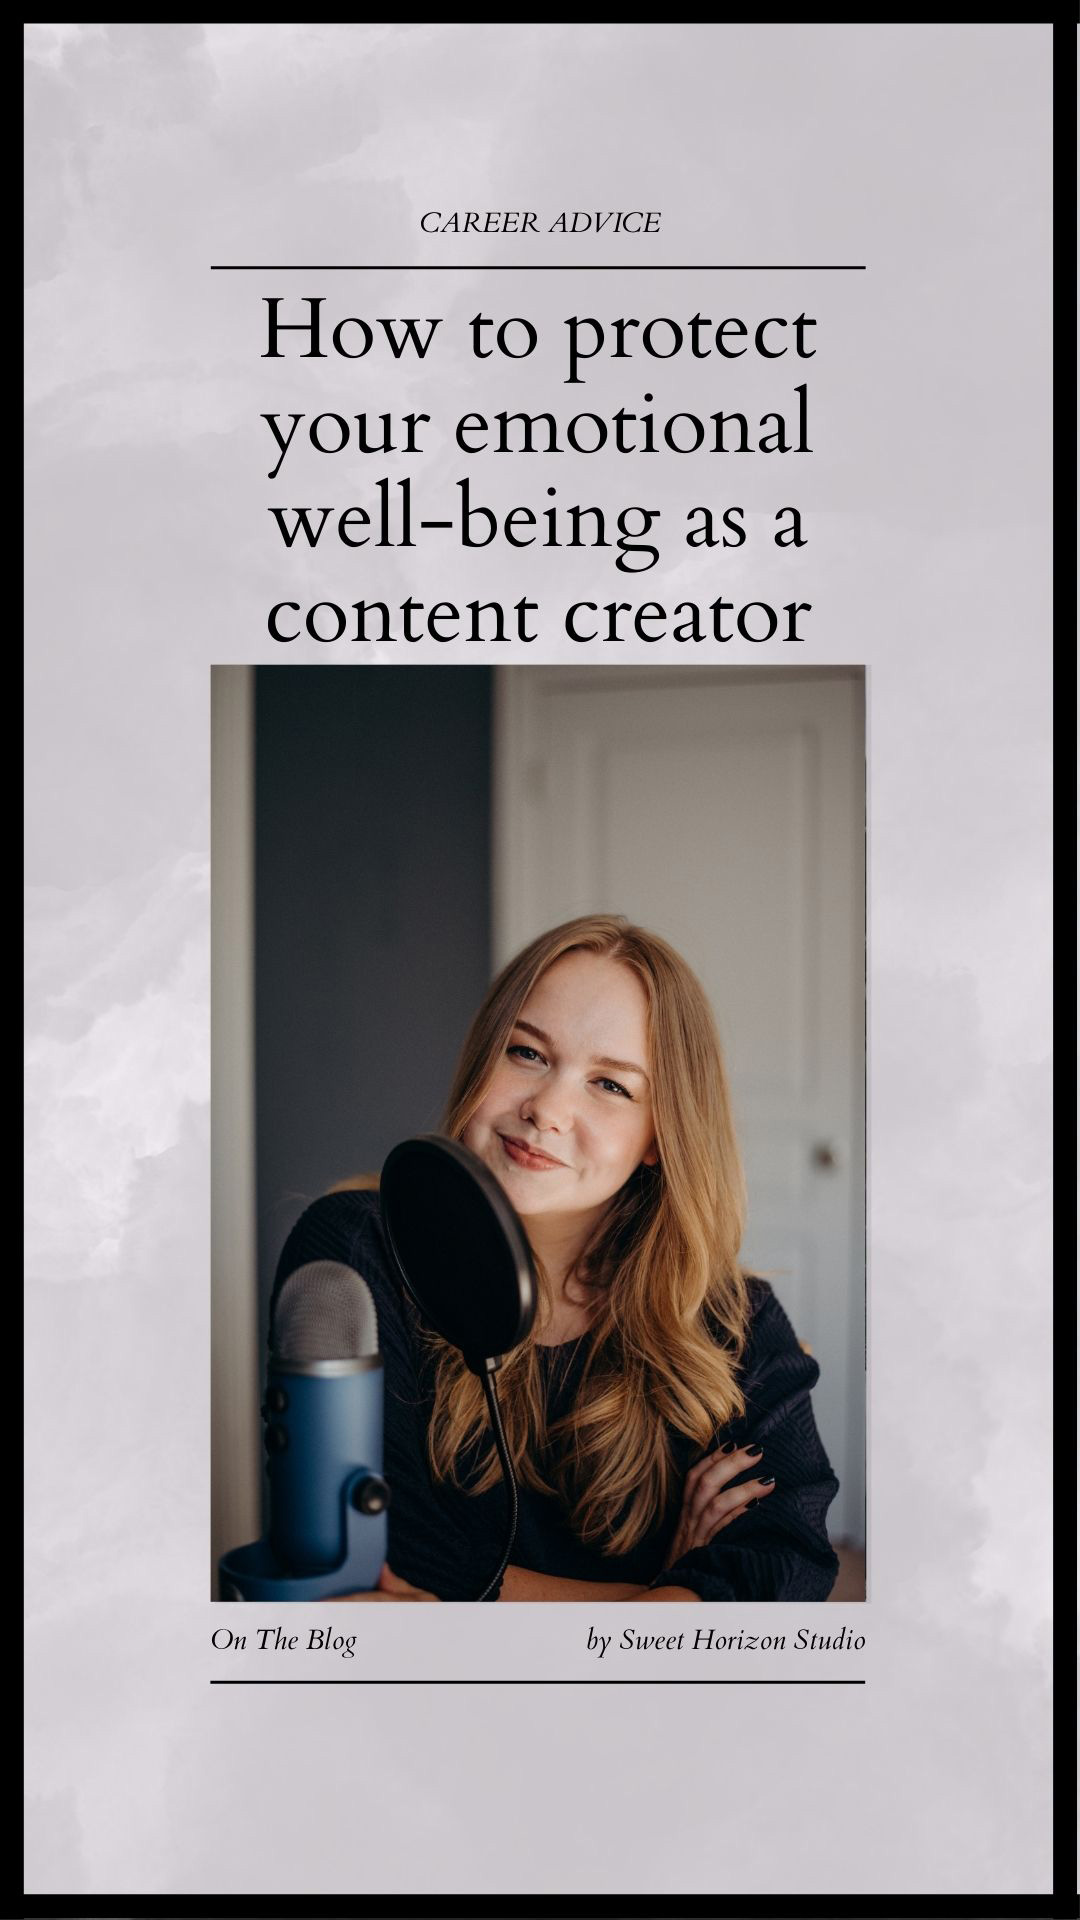 How to protect your emotional well-being as a content creator from www.sweethorizonblog.com